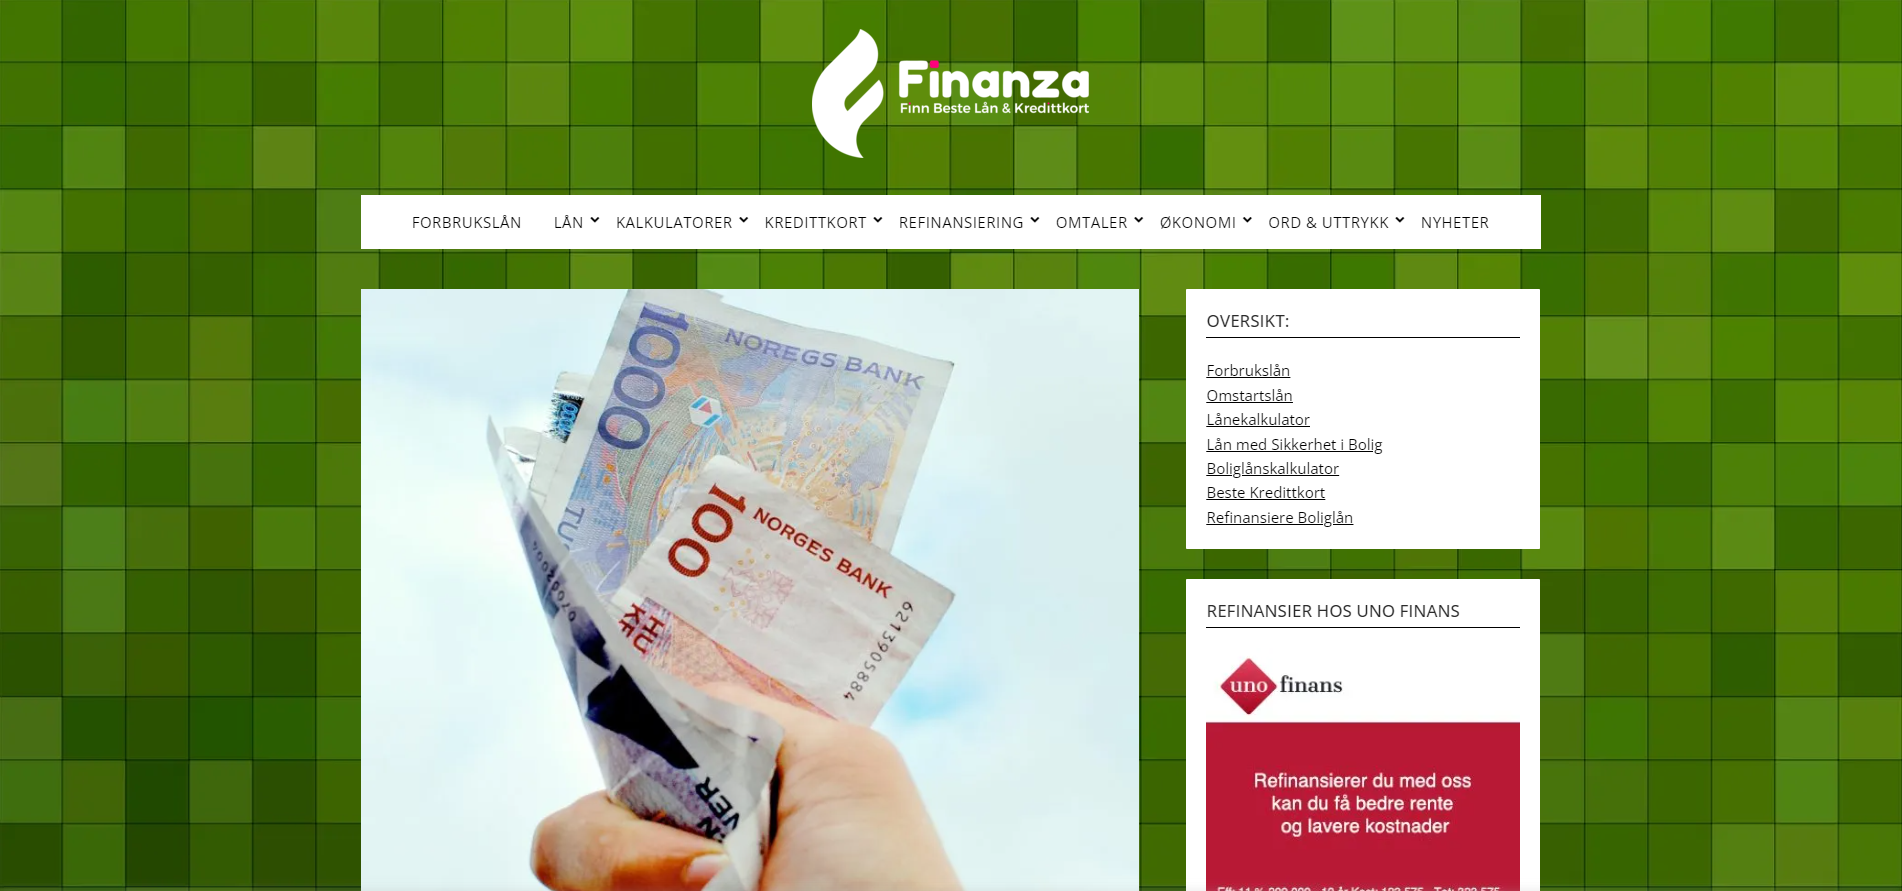 How To Secure A 300,000 NOK Loan: Finanza’s Beginner’s Guide